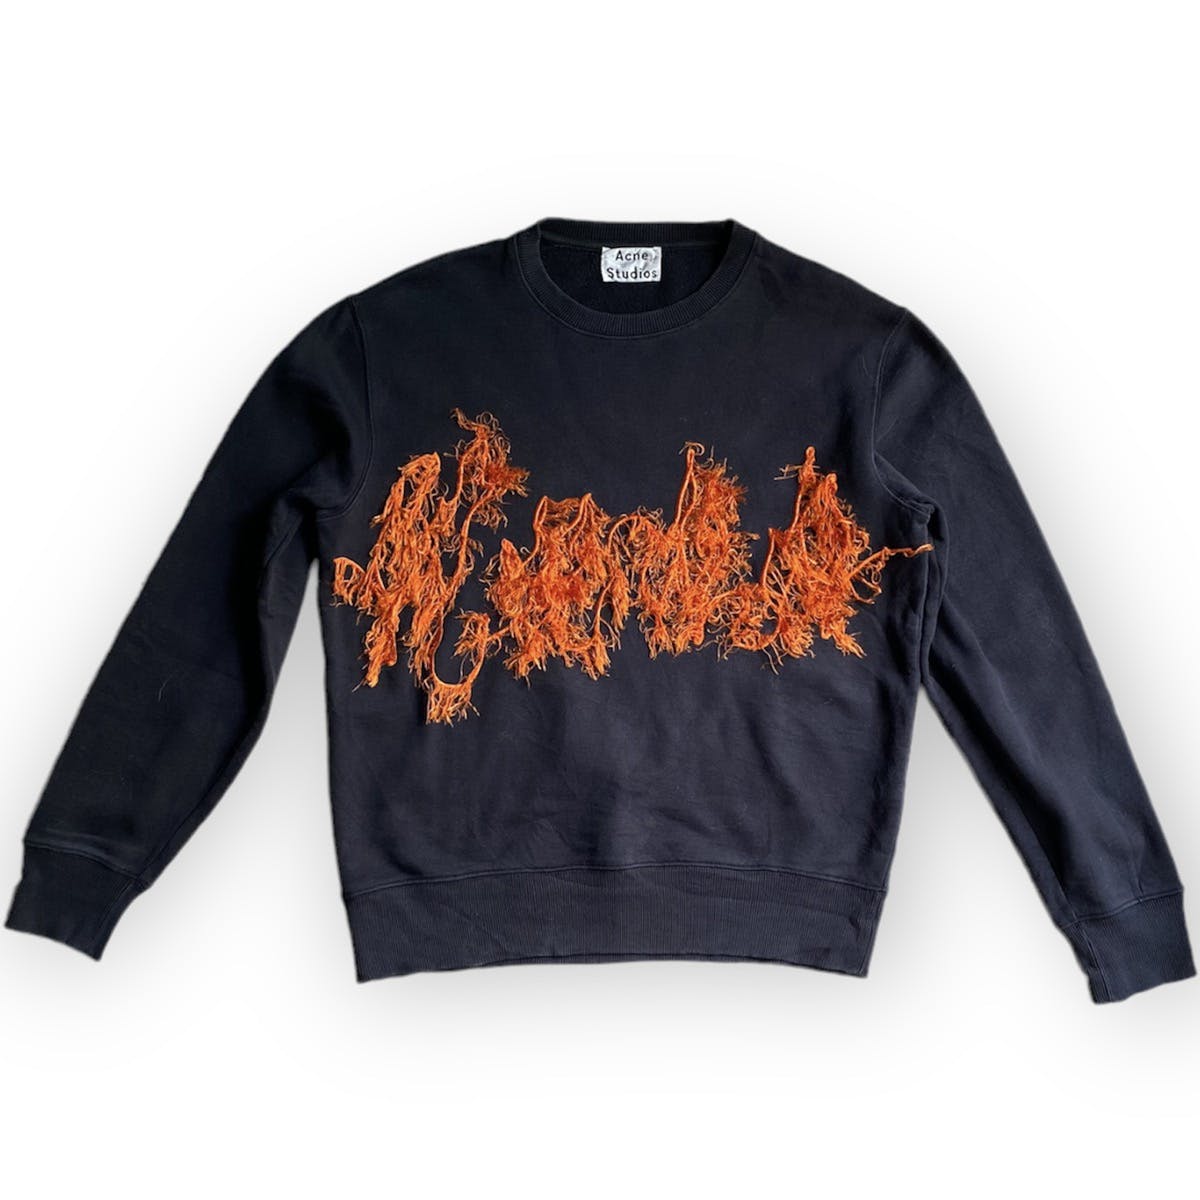 Acne Studios Carly Flame Sweater - 1